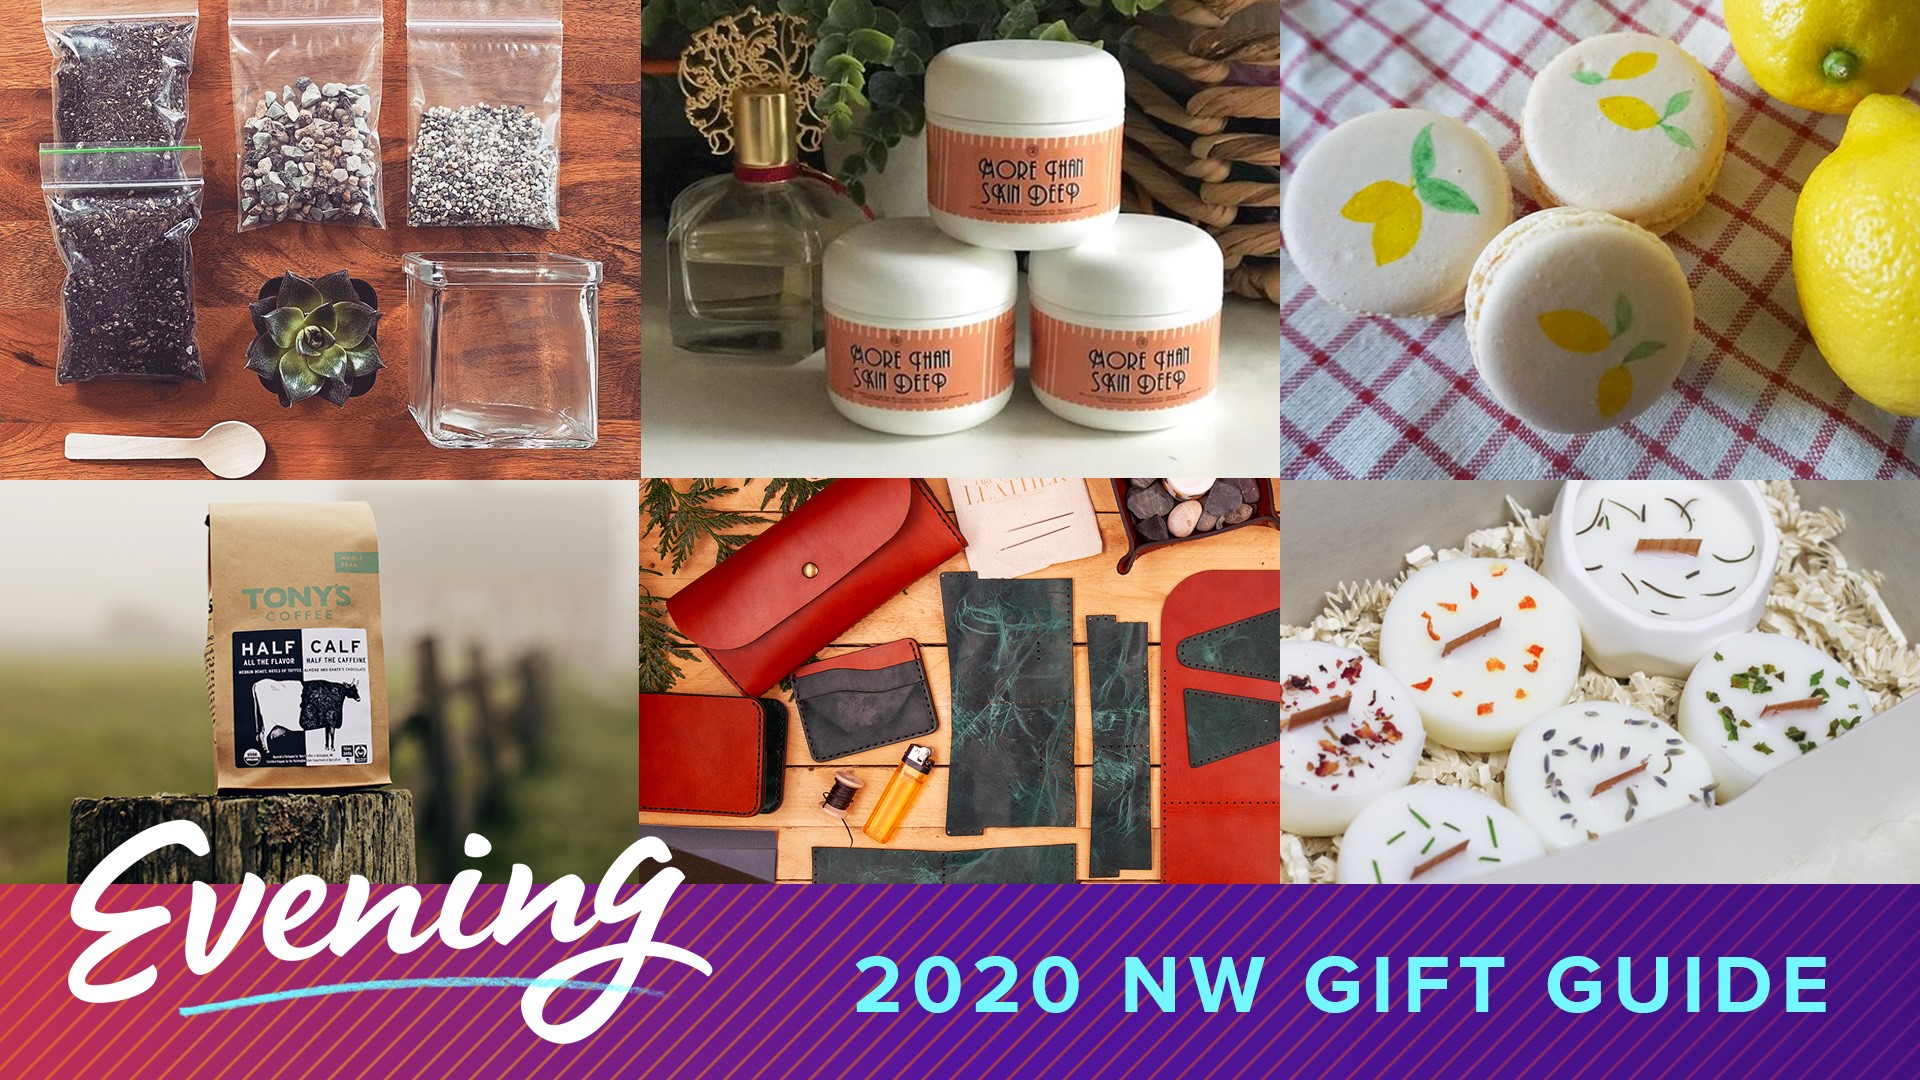 It's the most wonderful time... to shop local! Here are our picks of gifts for your favorite wine-o, home-dweller, plant parent and more